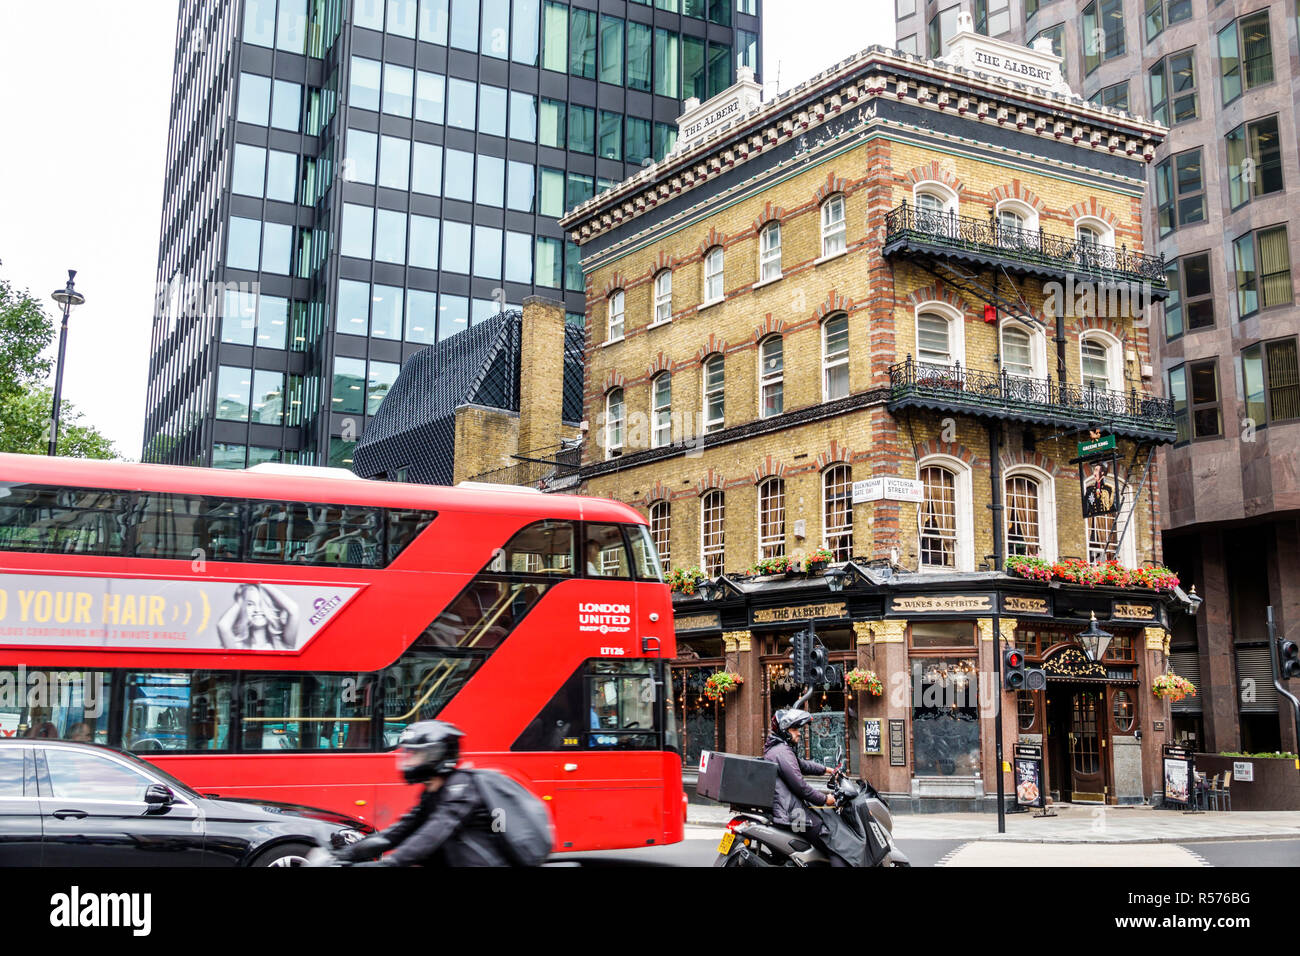 London England,UK,Westminster,Victoria Street,The Albert Pub,Victorian public house,building exterior,red double-decker bus,intersection,moto,UK Foto Stock